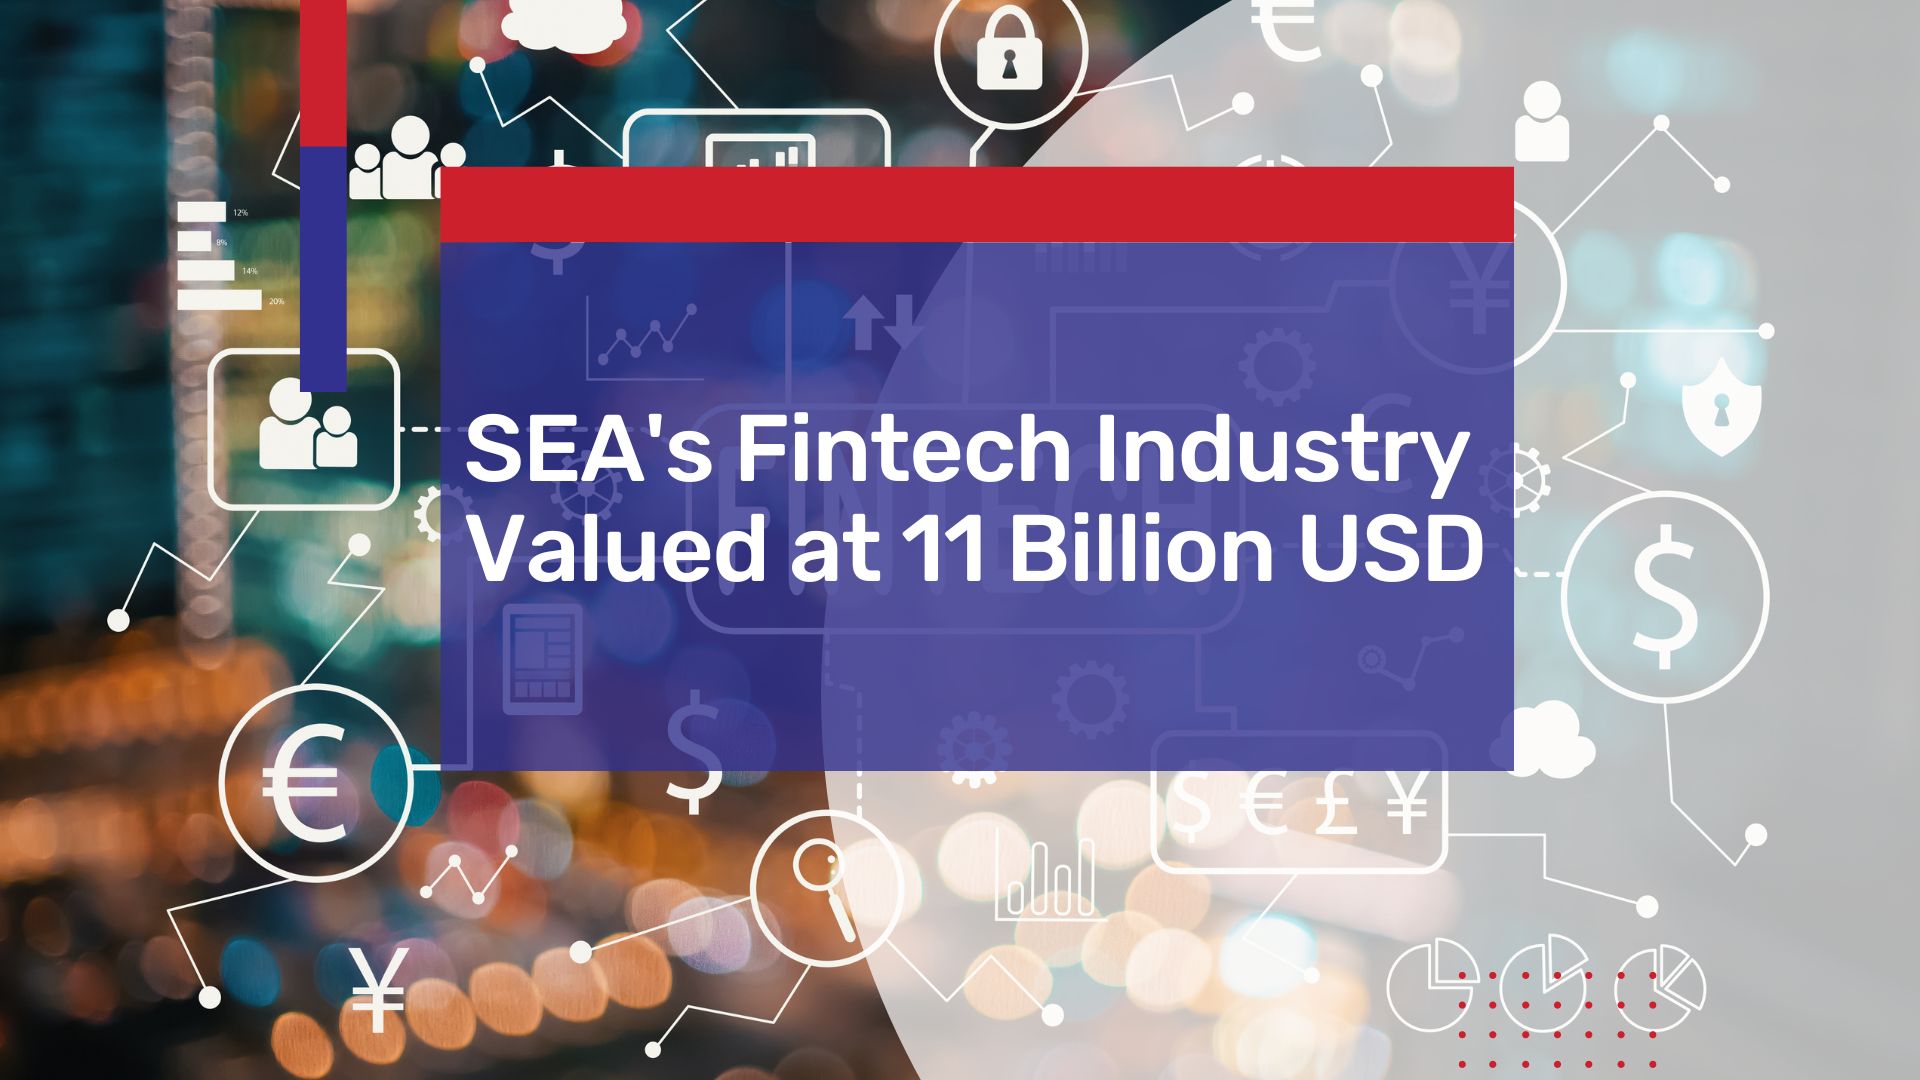 Southeast Asia Fintech Industry Valued at 11 Billion USD